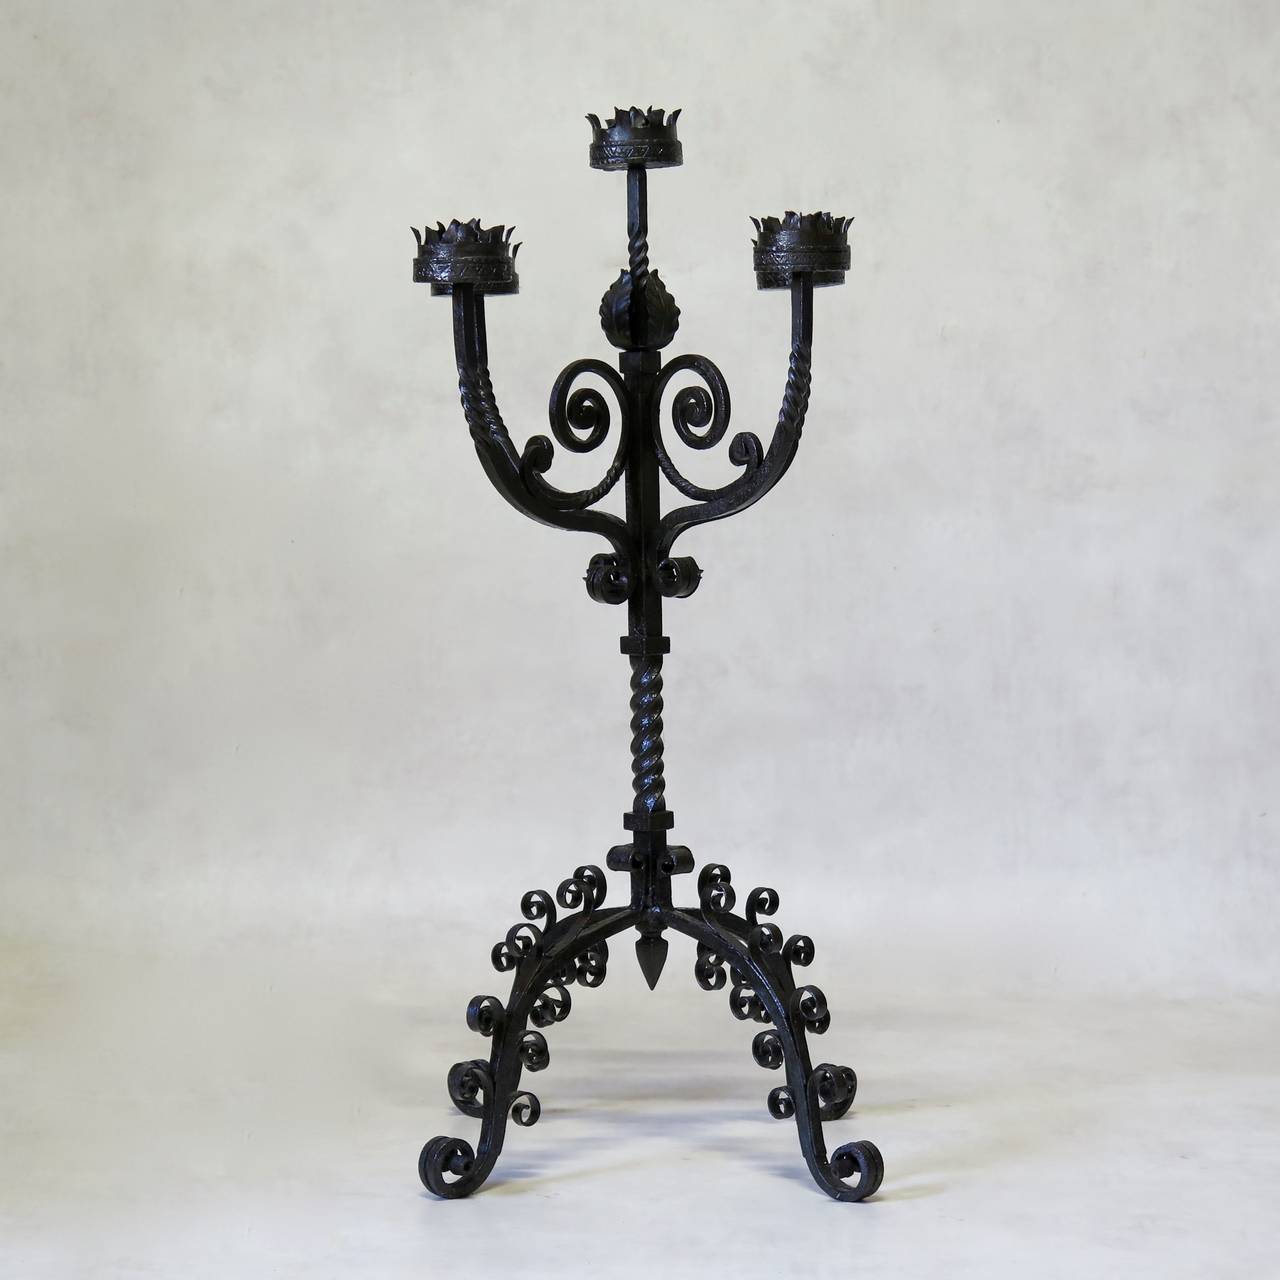 Ornate pair of wrought-iron candle holders. Lovely scrolling and patterned iron work.